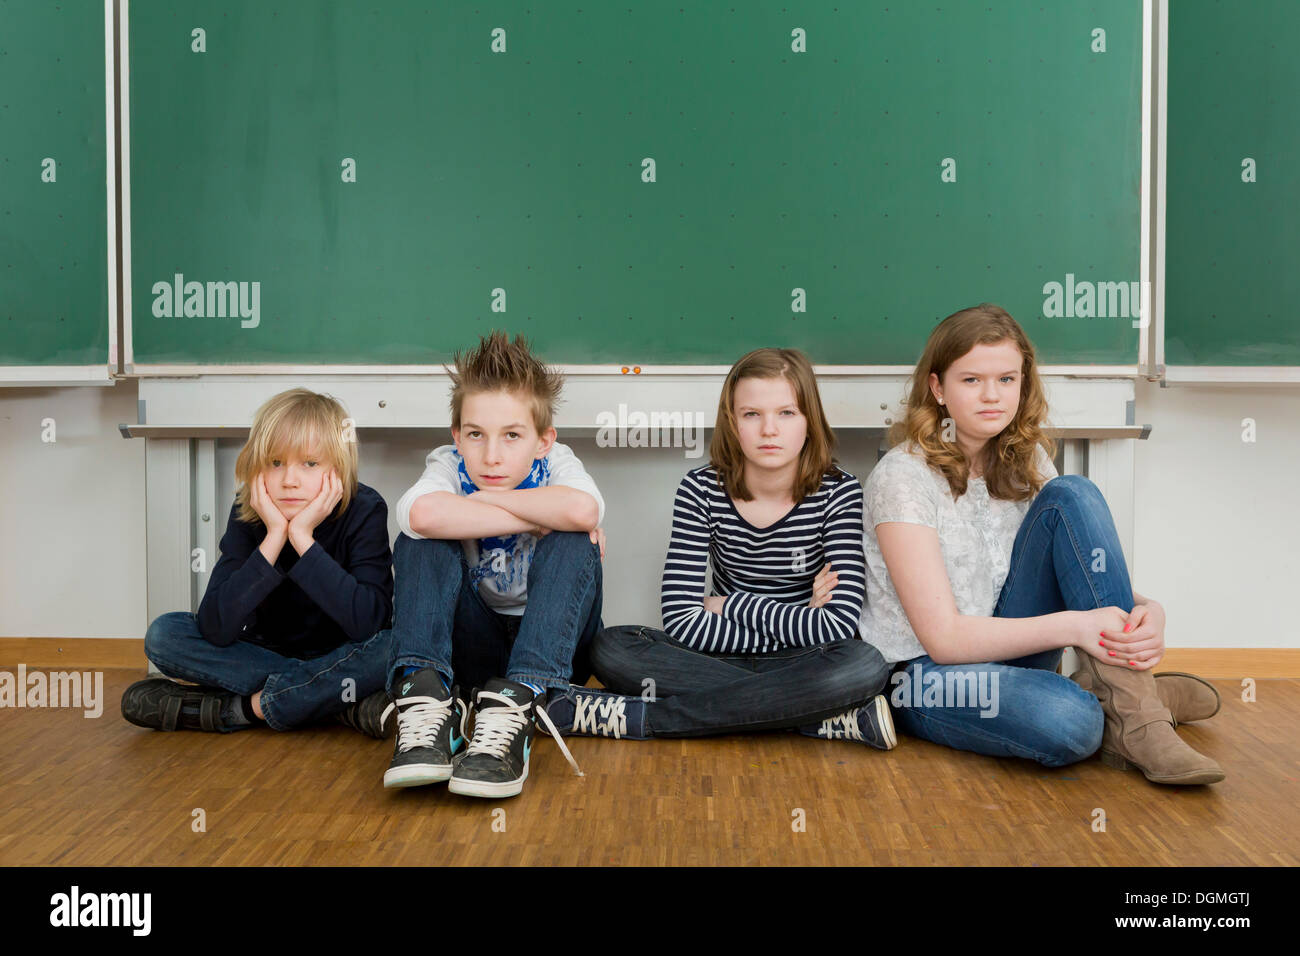 School children sitting bored in the classroom on the floor in front of the blackboard, Germany Stock Photo